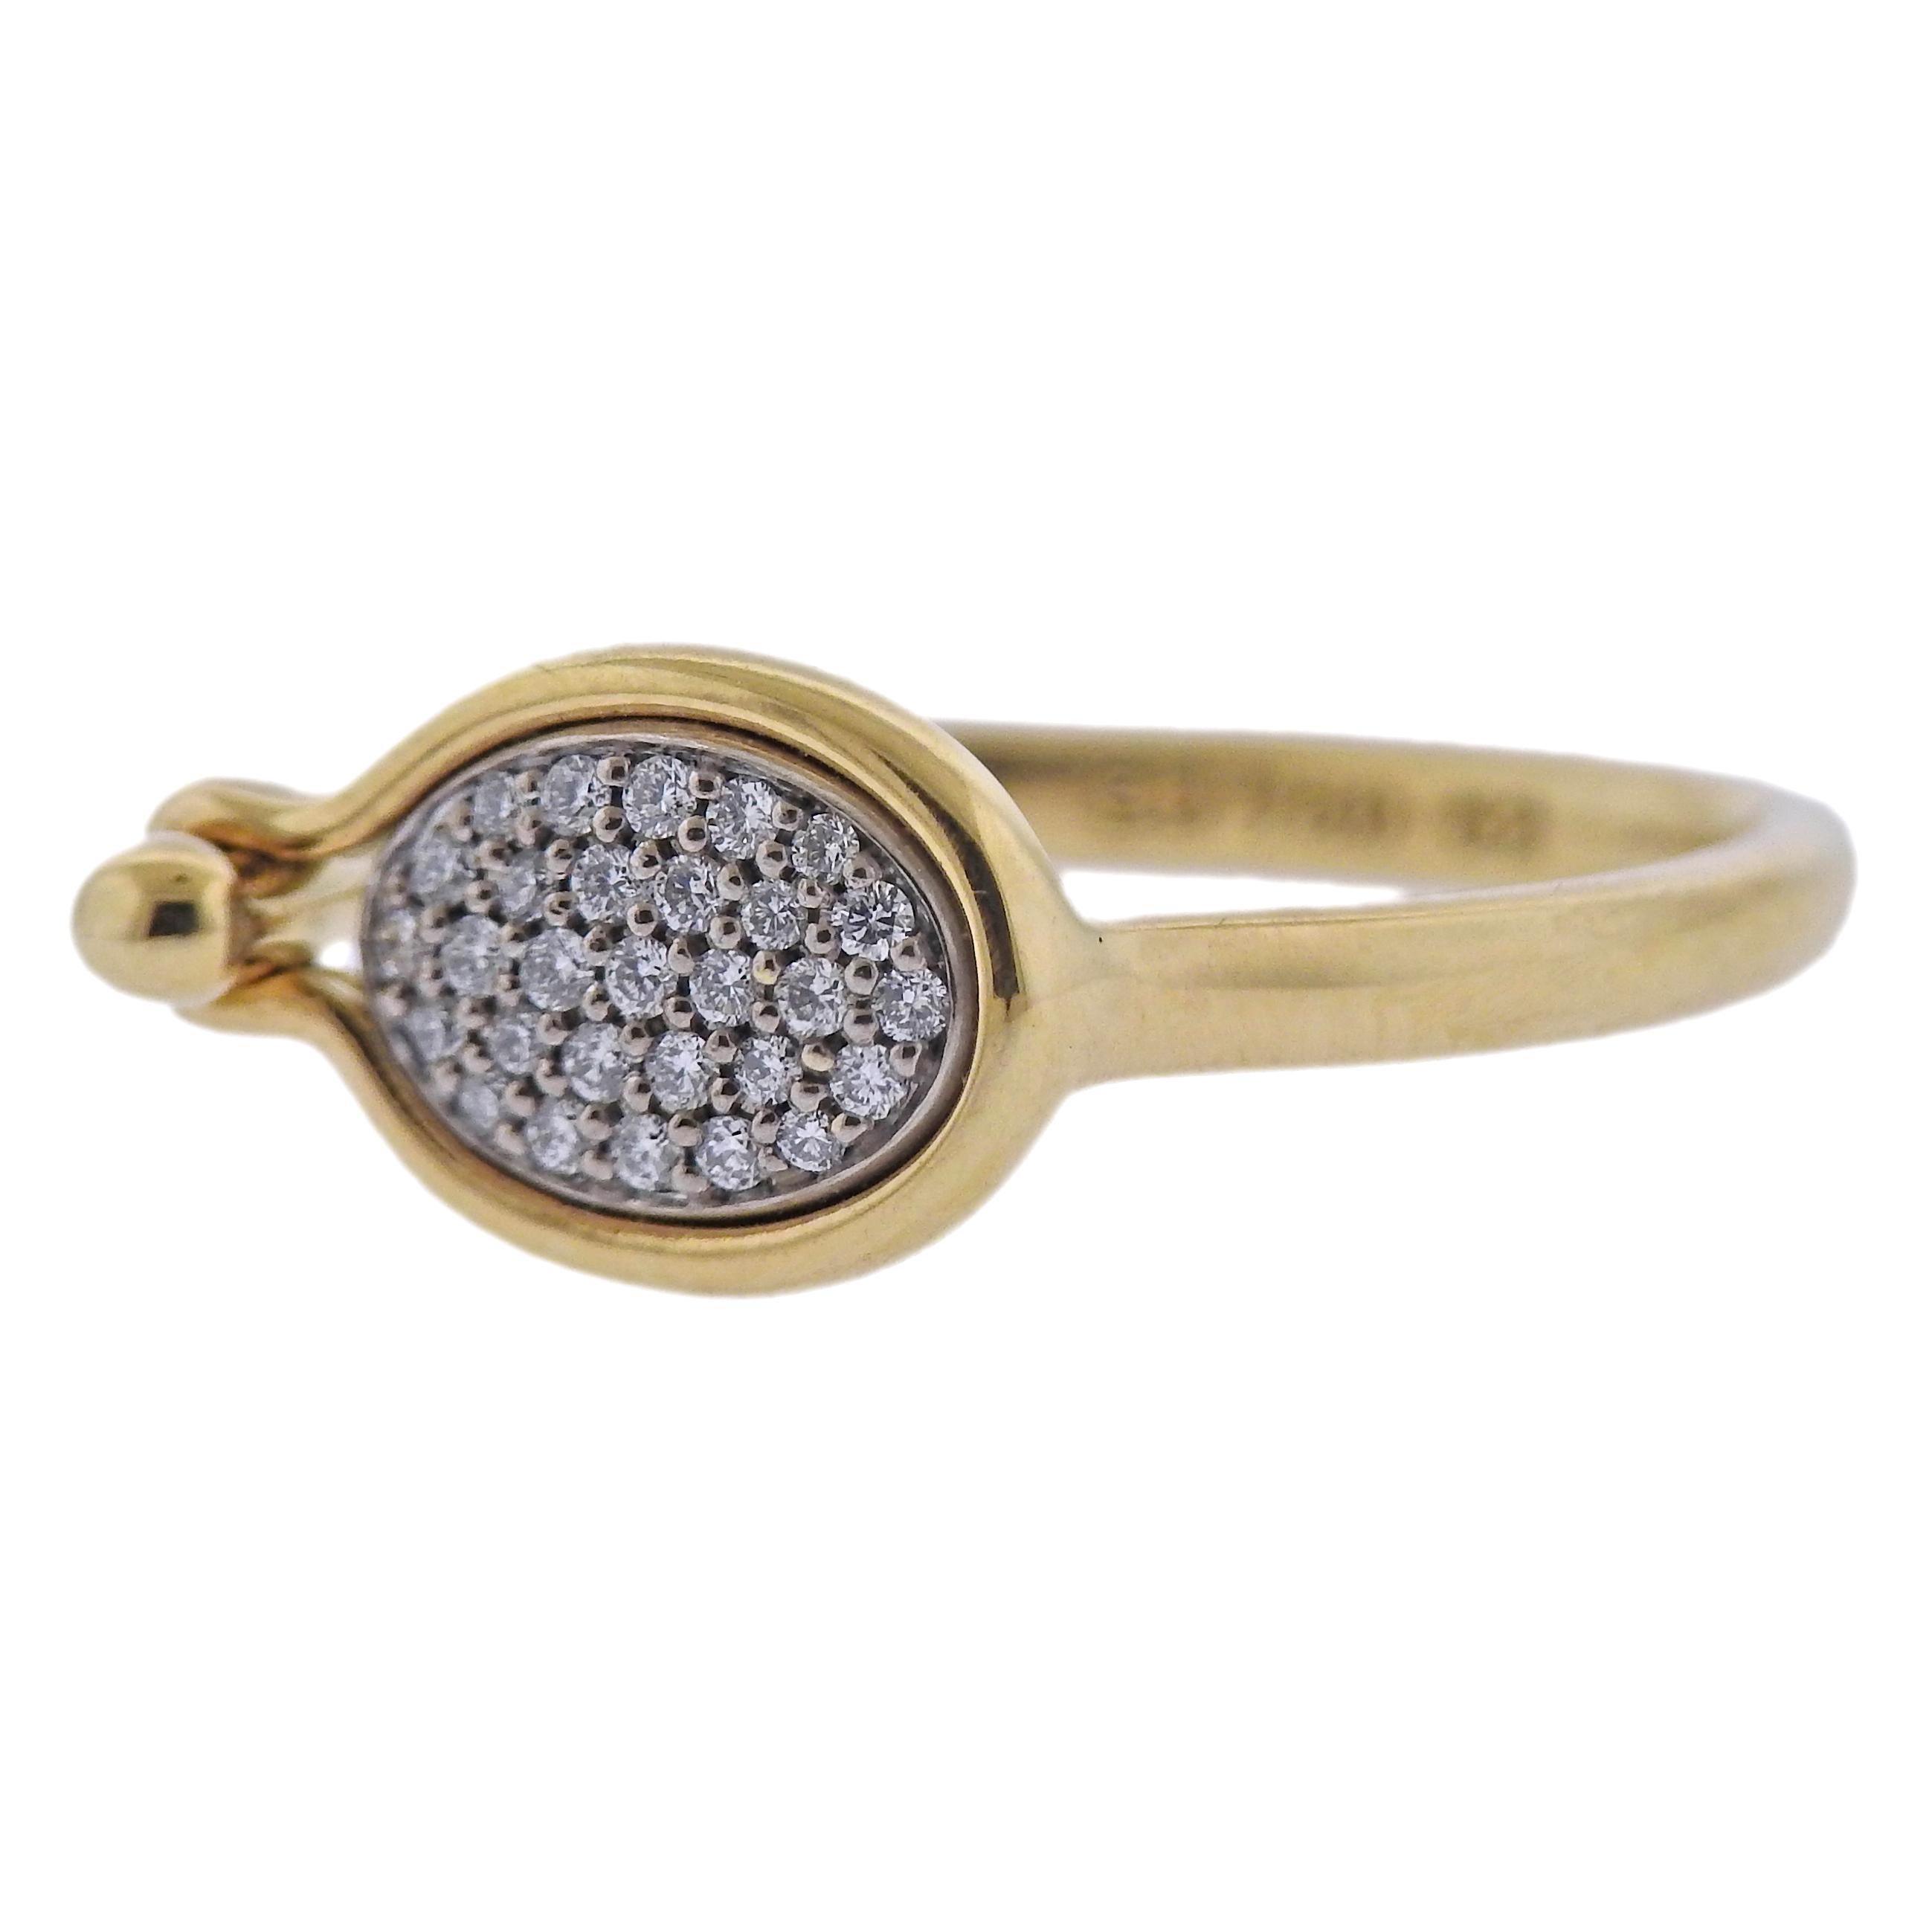 Brand new Georg Jensen 18k gold ring from Savannah collection, with approx. 0.11ctw G/VS diamonds. Top of the ring - 9 x 12mm. Size 52. Model # 100012697. Marked: GJ mark, 750. Weight - 3.4 grams.